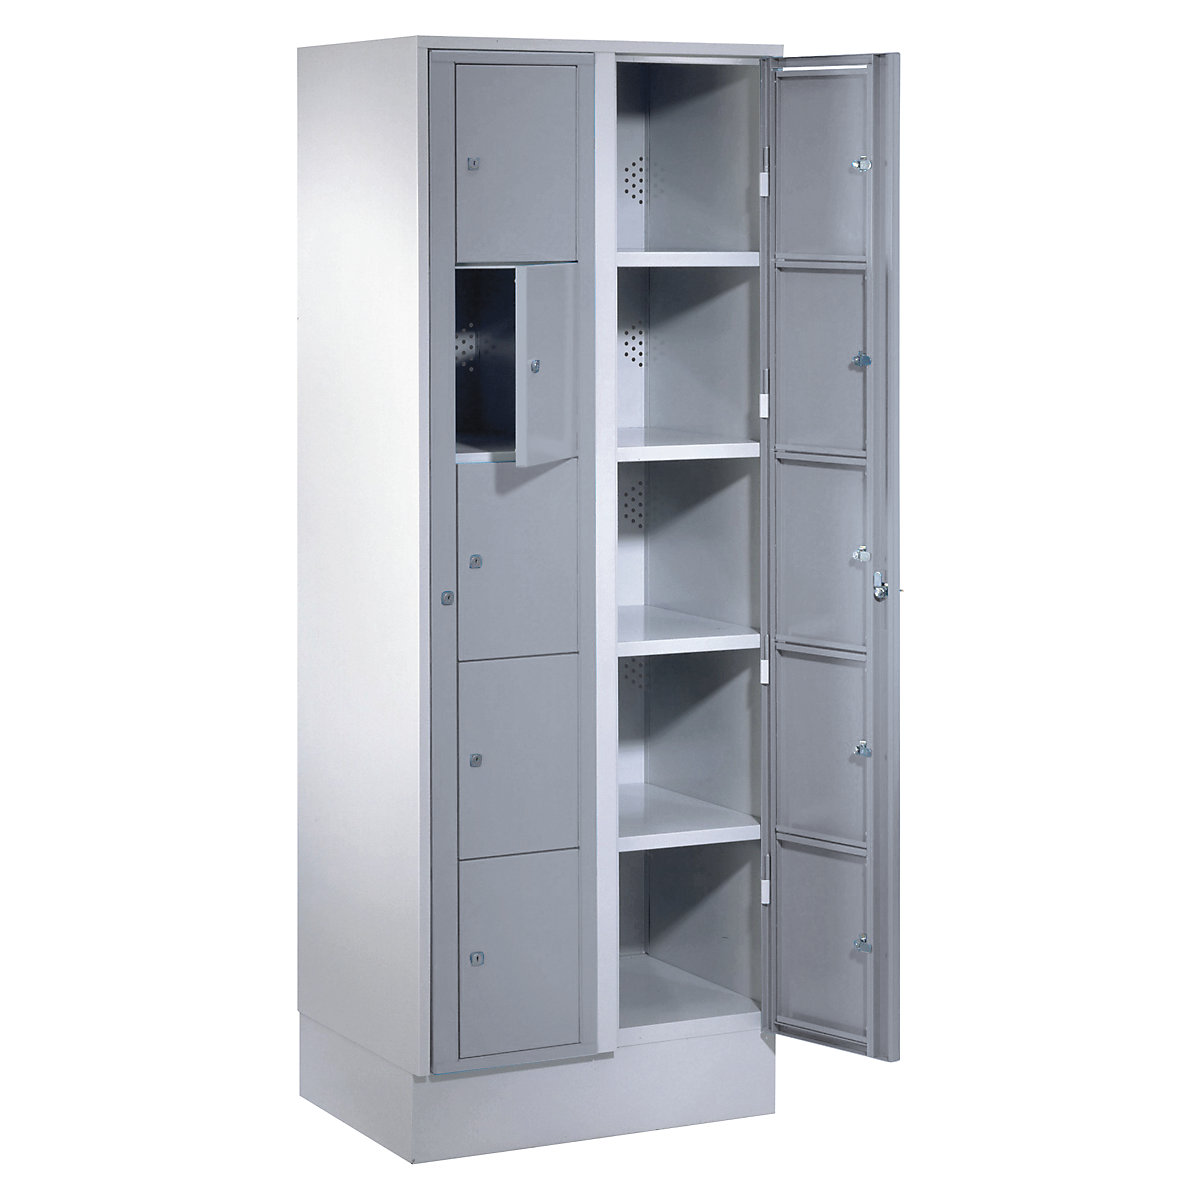 Laundry cabinet – Wolf, HxWxD 1800 x 700 x 500 mm, 10 compartments, light grey / silver grey-13